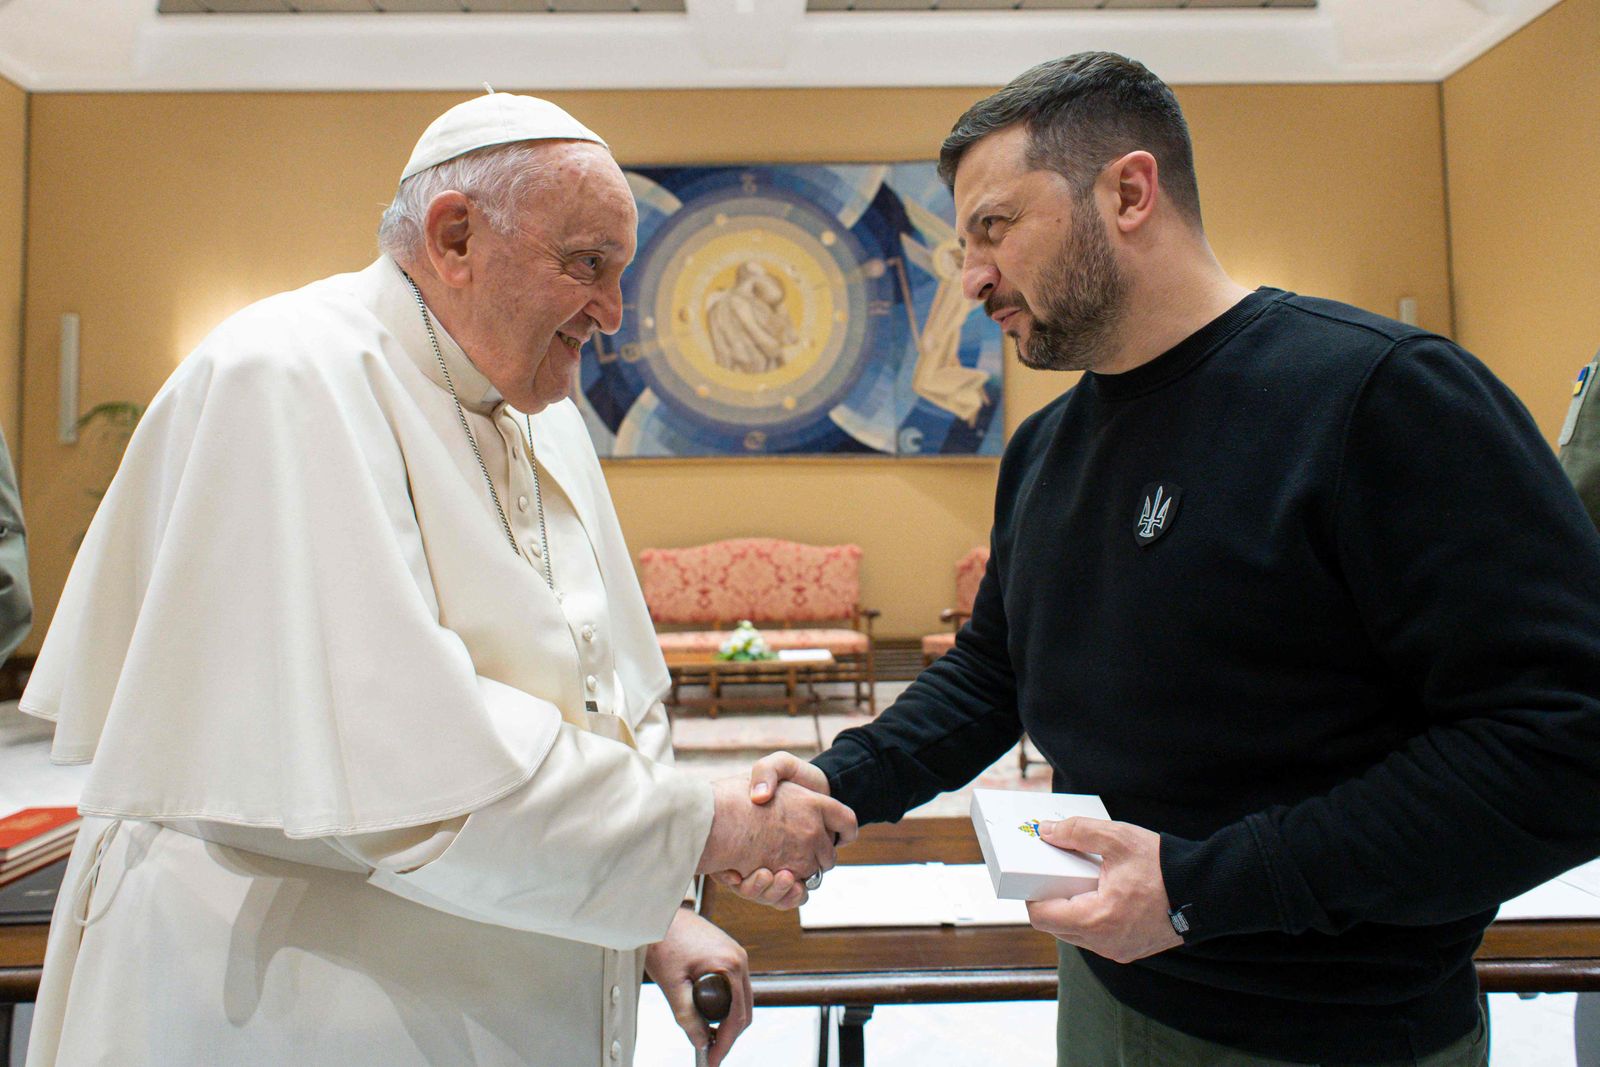 This photo taken and issued as a handout on May 13, 2023 by the Vatican Media shows Pope Francis shake hands with Ukrainian President Volodymyr Zelensky following a private audience in The Vatican. Ukrainian President Volodymyr Zelensky arrived in Rome on May 13 for meetings with President of Italy Sergio Mattarella, Prime Minister Giorgia Meloni and Pope Francis in his first visit to Italy since Russia's invasion. (Photo by Handout / VATICAN MEDIA / AFP) / RESTRICTED TO EDITORIAL USE - MANDATORY CREDIT 